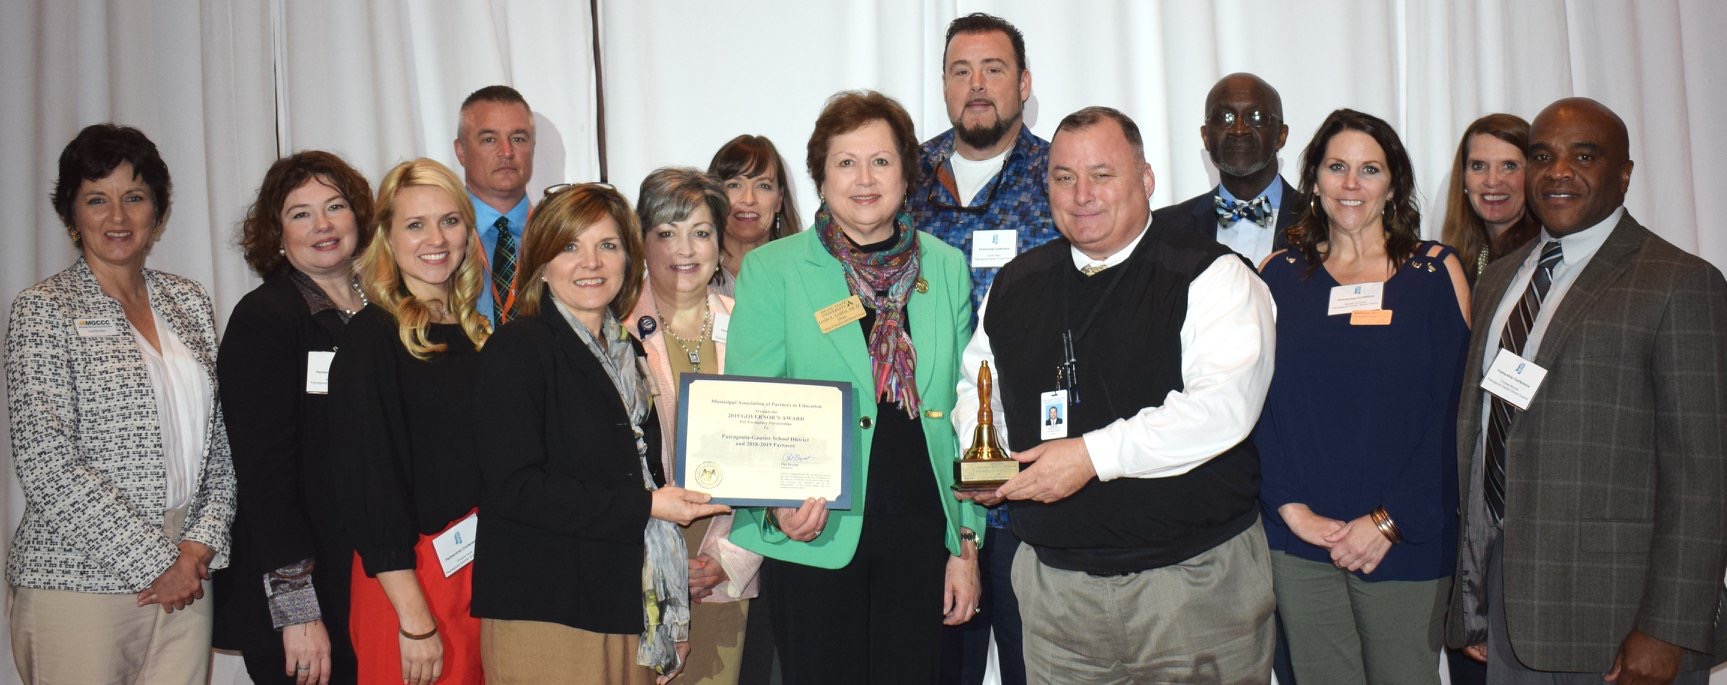 Photo of Pascagoula-Gautier School District personnel and their partners at the 17th annual Mississippi Association of Partners in Education Governor's Award luncheon on February 26 in Hattiesburg.